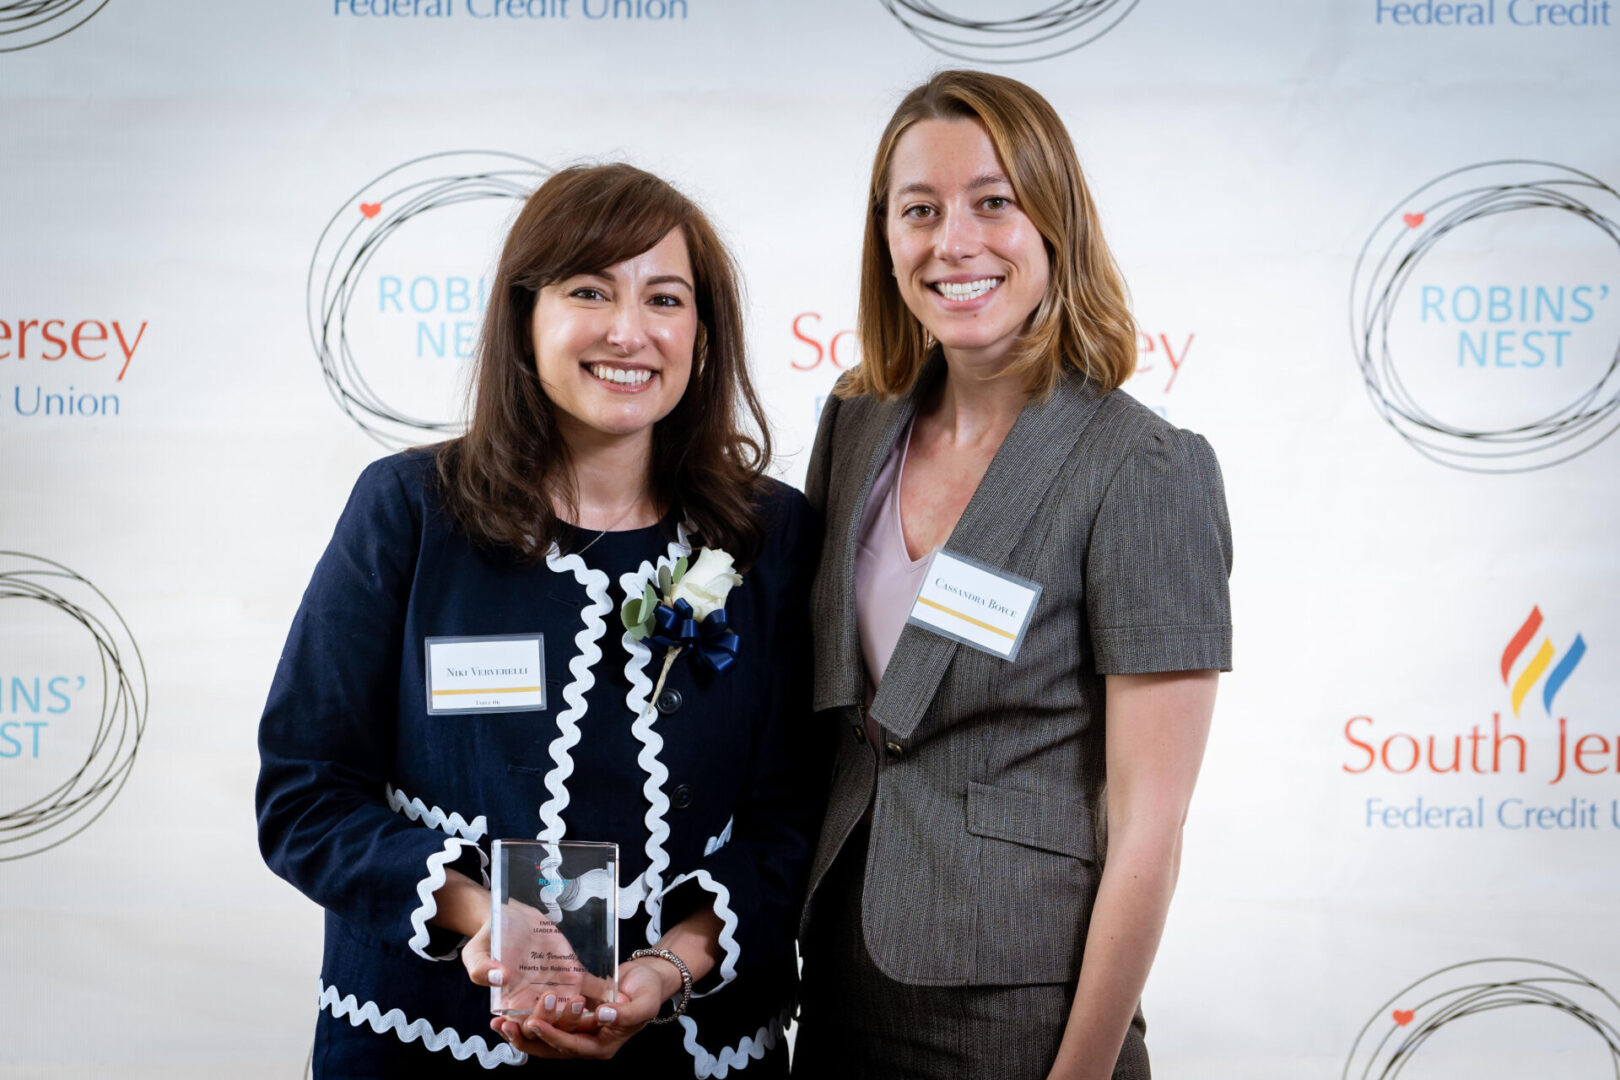 Niki Ververelli-Diamond poses with 2019 Emerging Leader Award at the 2019 Hearts for Robins' Nest Event